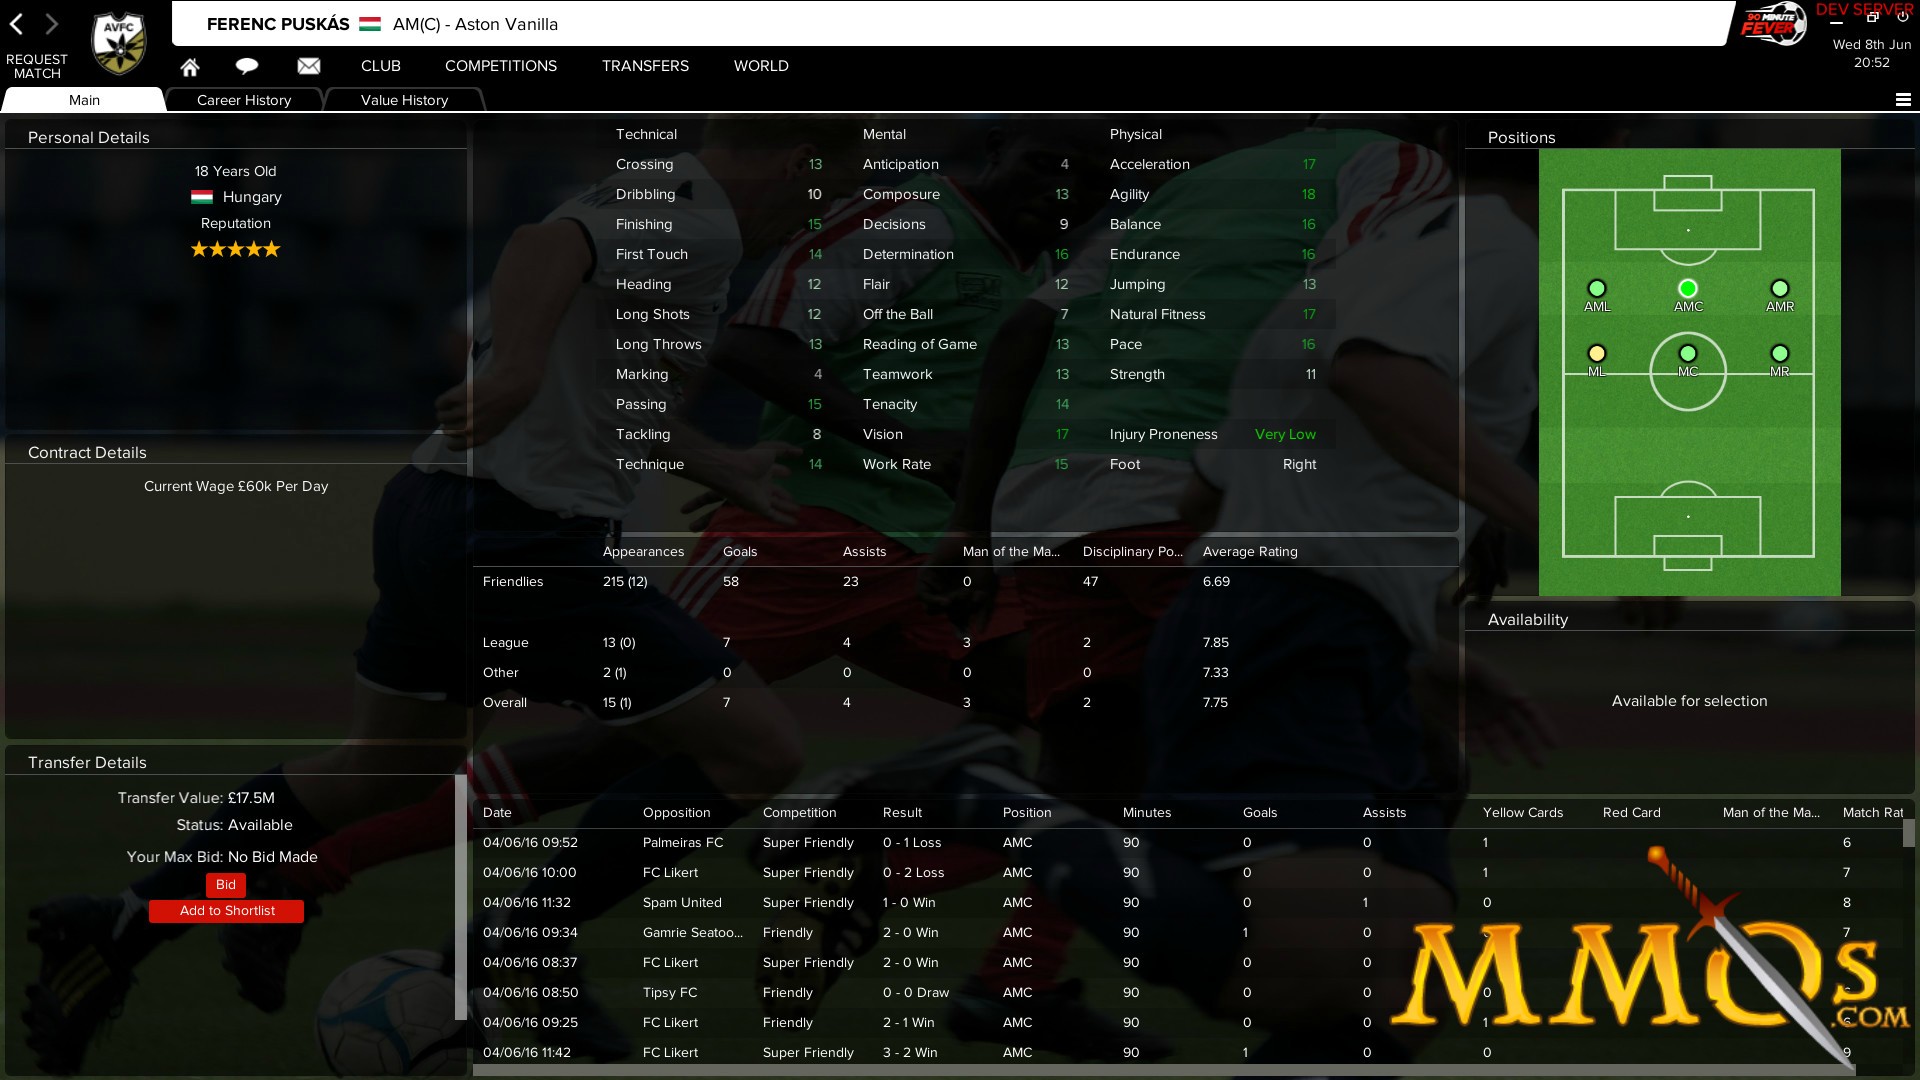 90 Minute Fever - Online Football (Soccer) Manager download the new version for mac